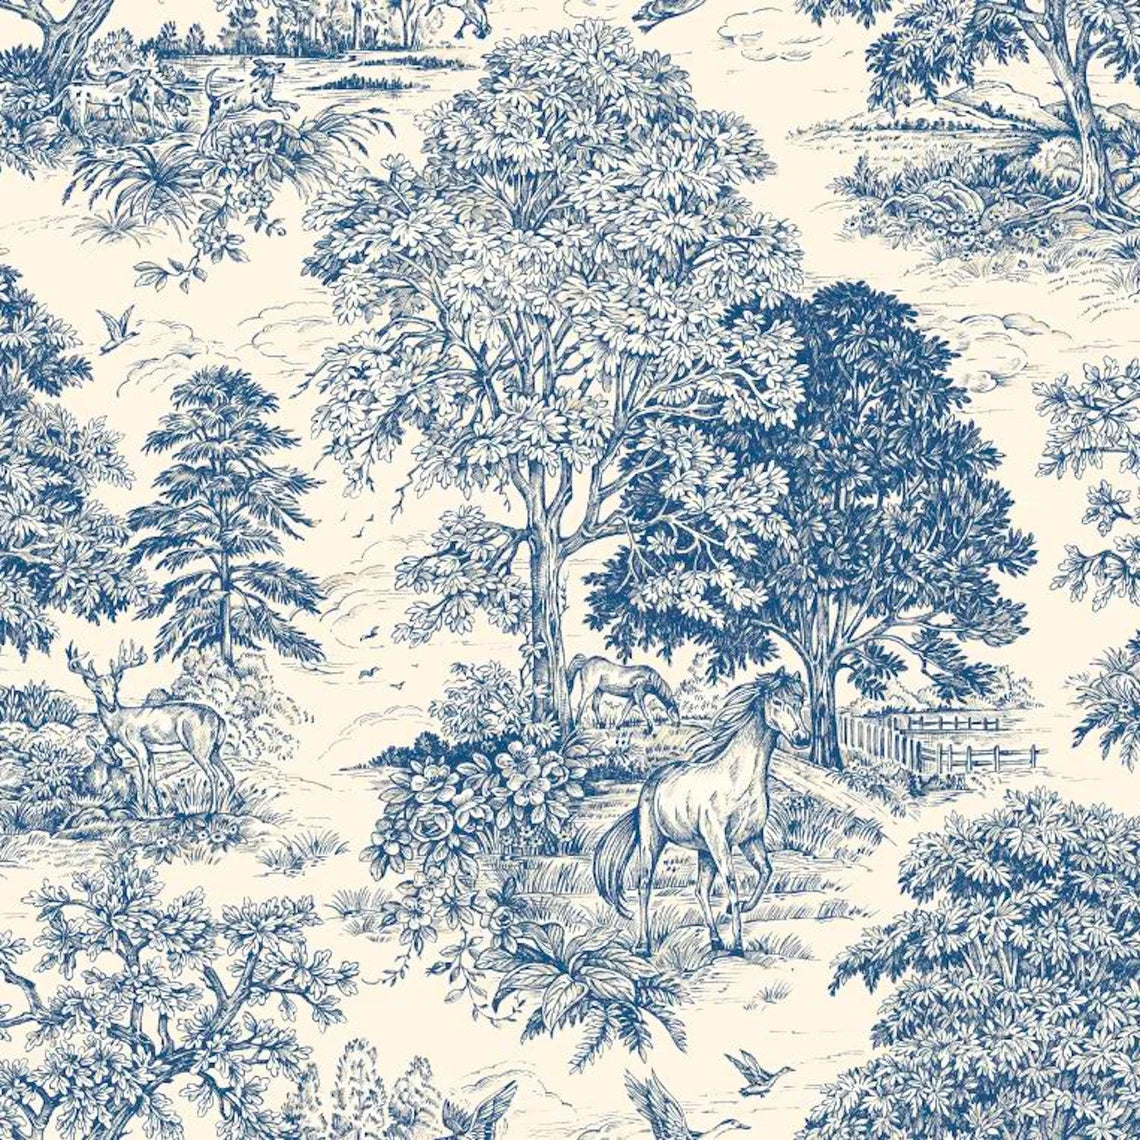 tailored tier cafe curtain panels pair in Yellowstone Bluebell Blue Country Toile- Horses, Deer, Dogs- Large Scale